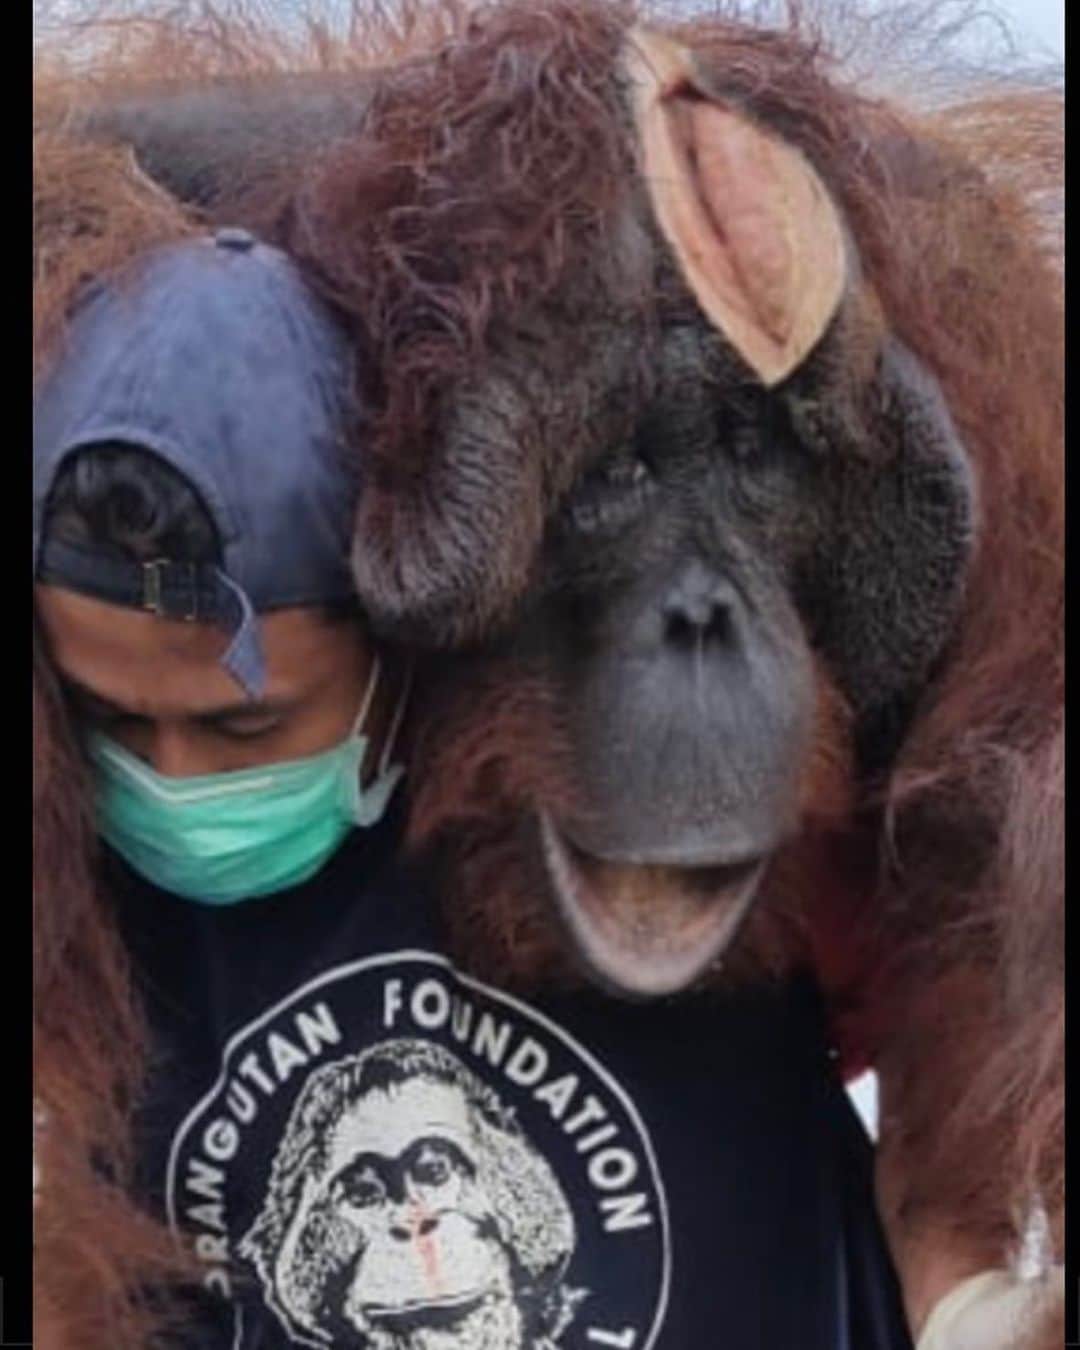 OFI Australiaのインスタグラム：「OFI is hard at work rescuing wild orangutans with the Indonesian Forestry Department. This adult male cheekpadder was rescued from a banana plantation and the horrifying open wound on his head was made by a human wielding a machete. Our OFI veterinarian has sewed up the wound & this poor orangutan has been taken to a quarantine facility. Once his wound heals he will be released to a secure forest on the boundary of Tanjung Puting National Park, an area patrolled by OFI and government rangers. The number of wounded wild orangutans OFI has rescued in the past year has grown tremendously as the forests of Borneo continue to fall and wild orangutan populations are decimated.  __________________________________ 🦧 OFIA President: Kobe Steele kobe@ofiaustralia.com  OFIA Patron: Dr Birute Galdikas @drbirute @orangutanfoundationintl @orangutan.canada www.orangutanfoundation.org.au 🦧 🧡 🦧 #orangutan #orphan #rescue #rehabilitate #release #BornToBeWild #Borneo #Indonesia #CampLeakey #saveorangutans #sayNOtopalmoil #palmoil #deforestation #destruction #rainforest #environment #nature #instanature #endangeredspecies #criticallyendangered #wildlife #orangutanfoundationintl #ofi #drbirute #ofiaustralia #FosterAnOrangutan」